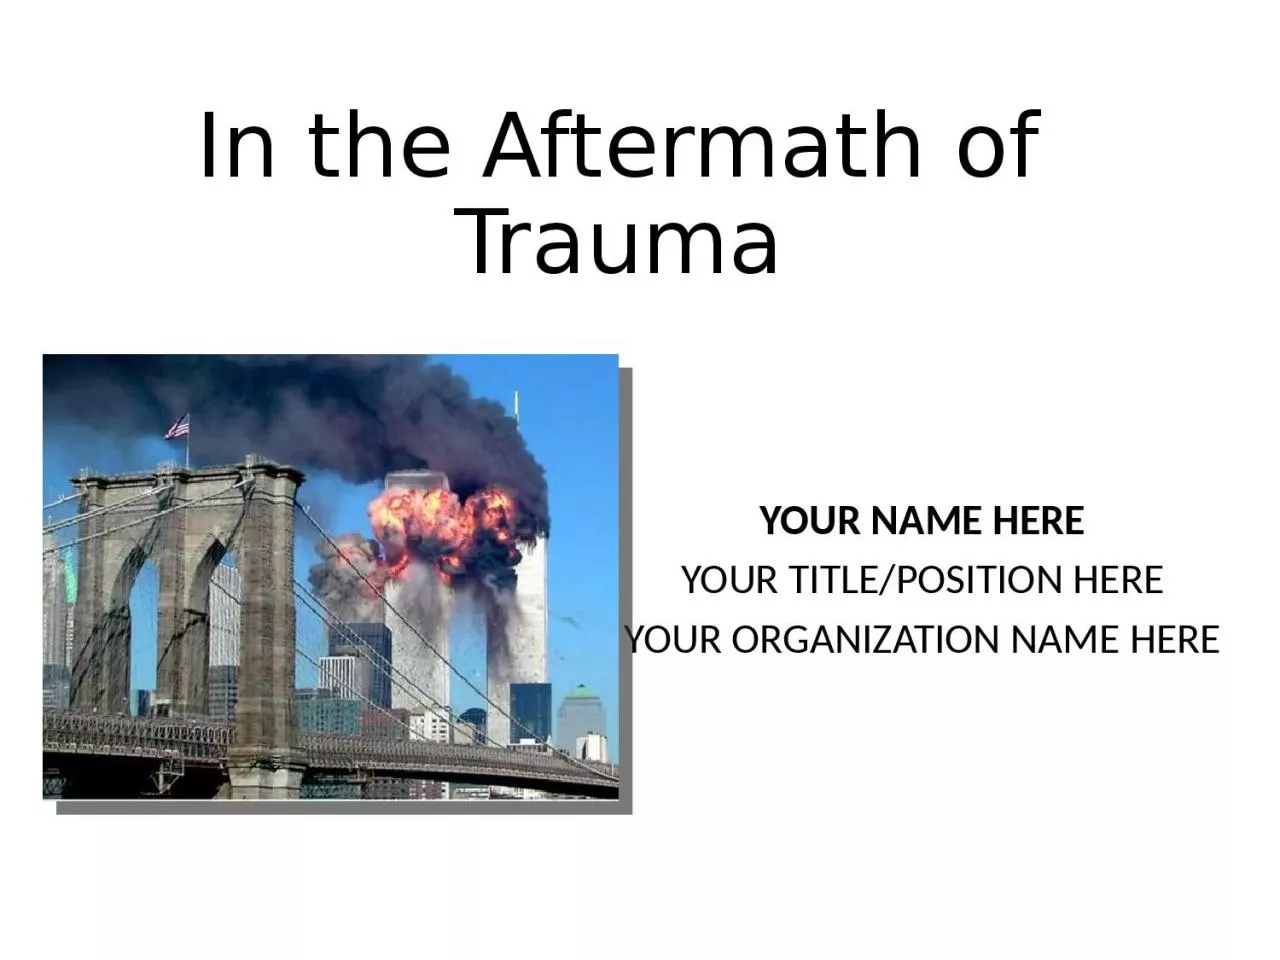 In the Aftermath of Trauma